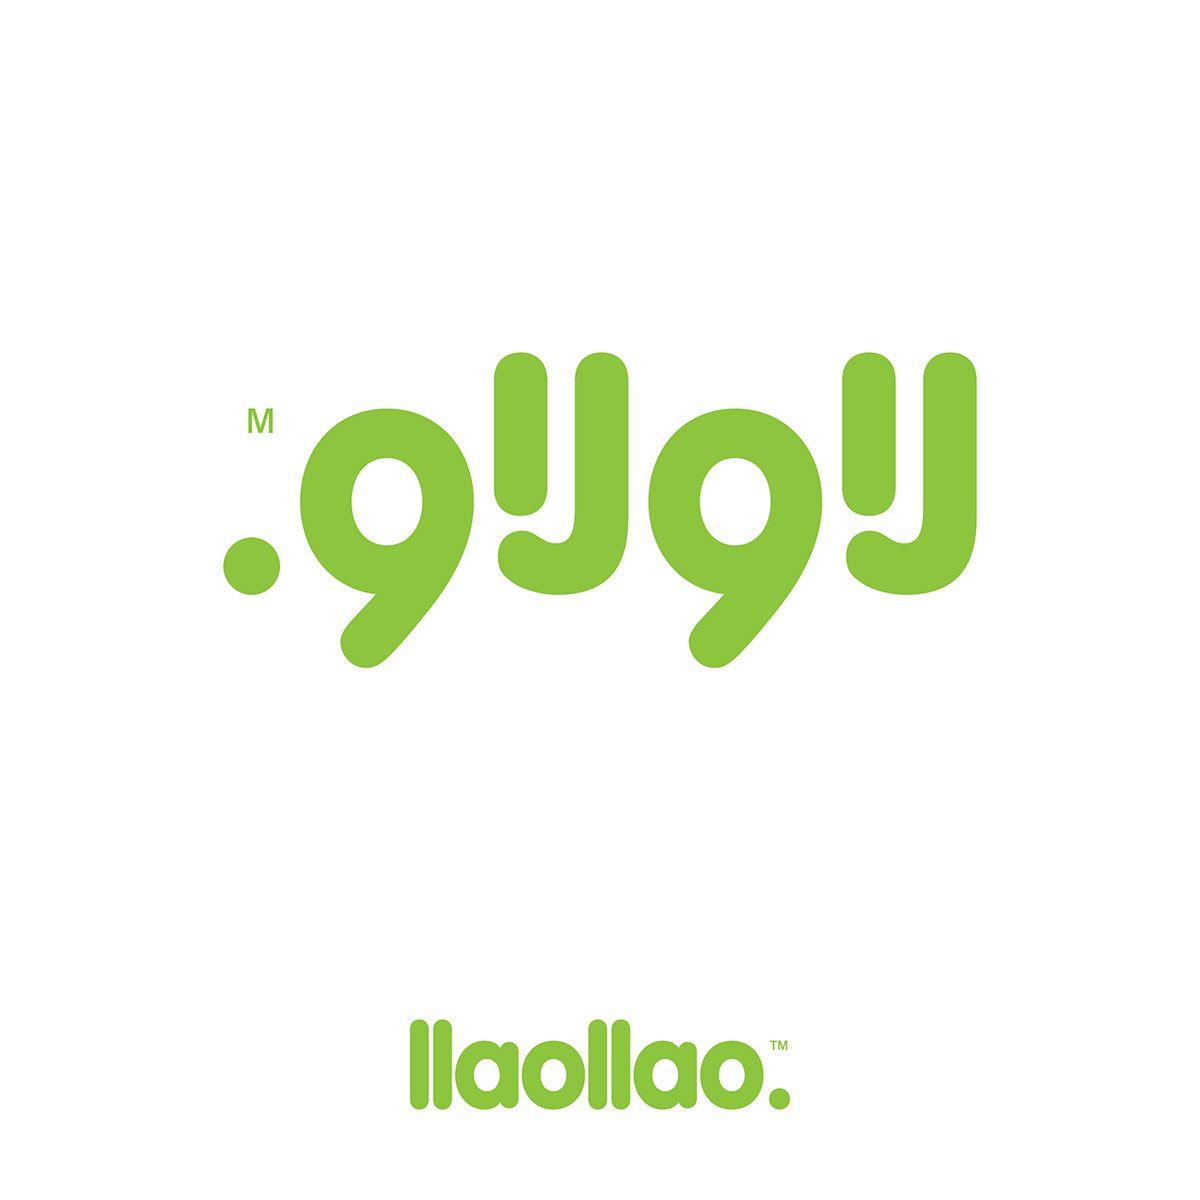 Popular Brands with a Green Logo - Popular Brands Logo - Arabic Version on Student Show